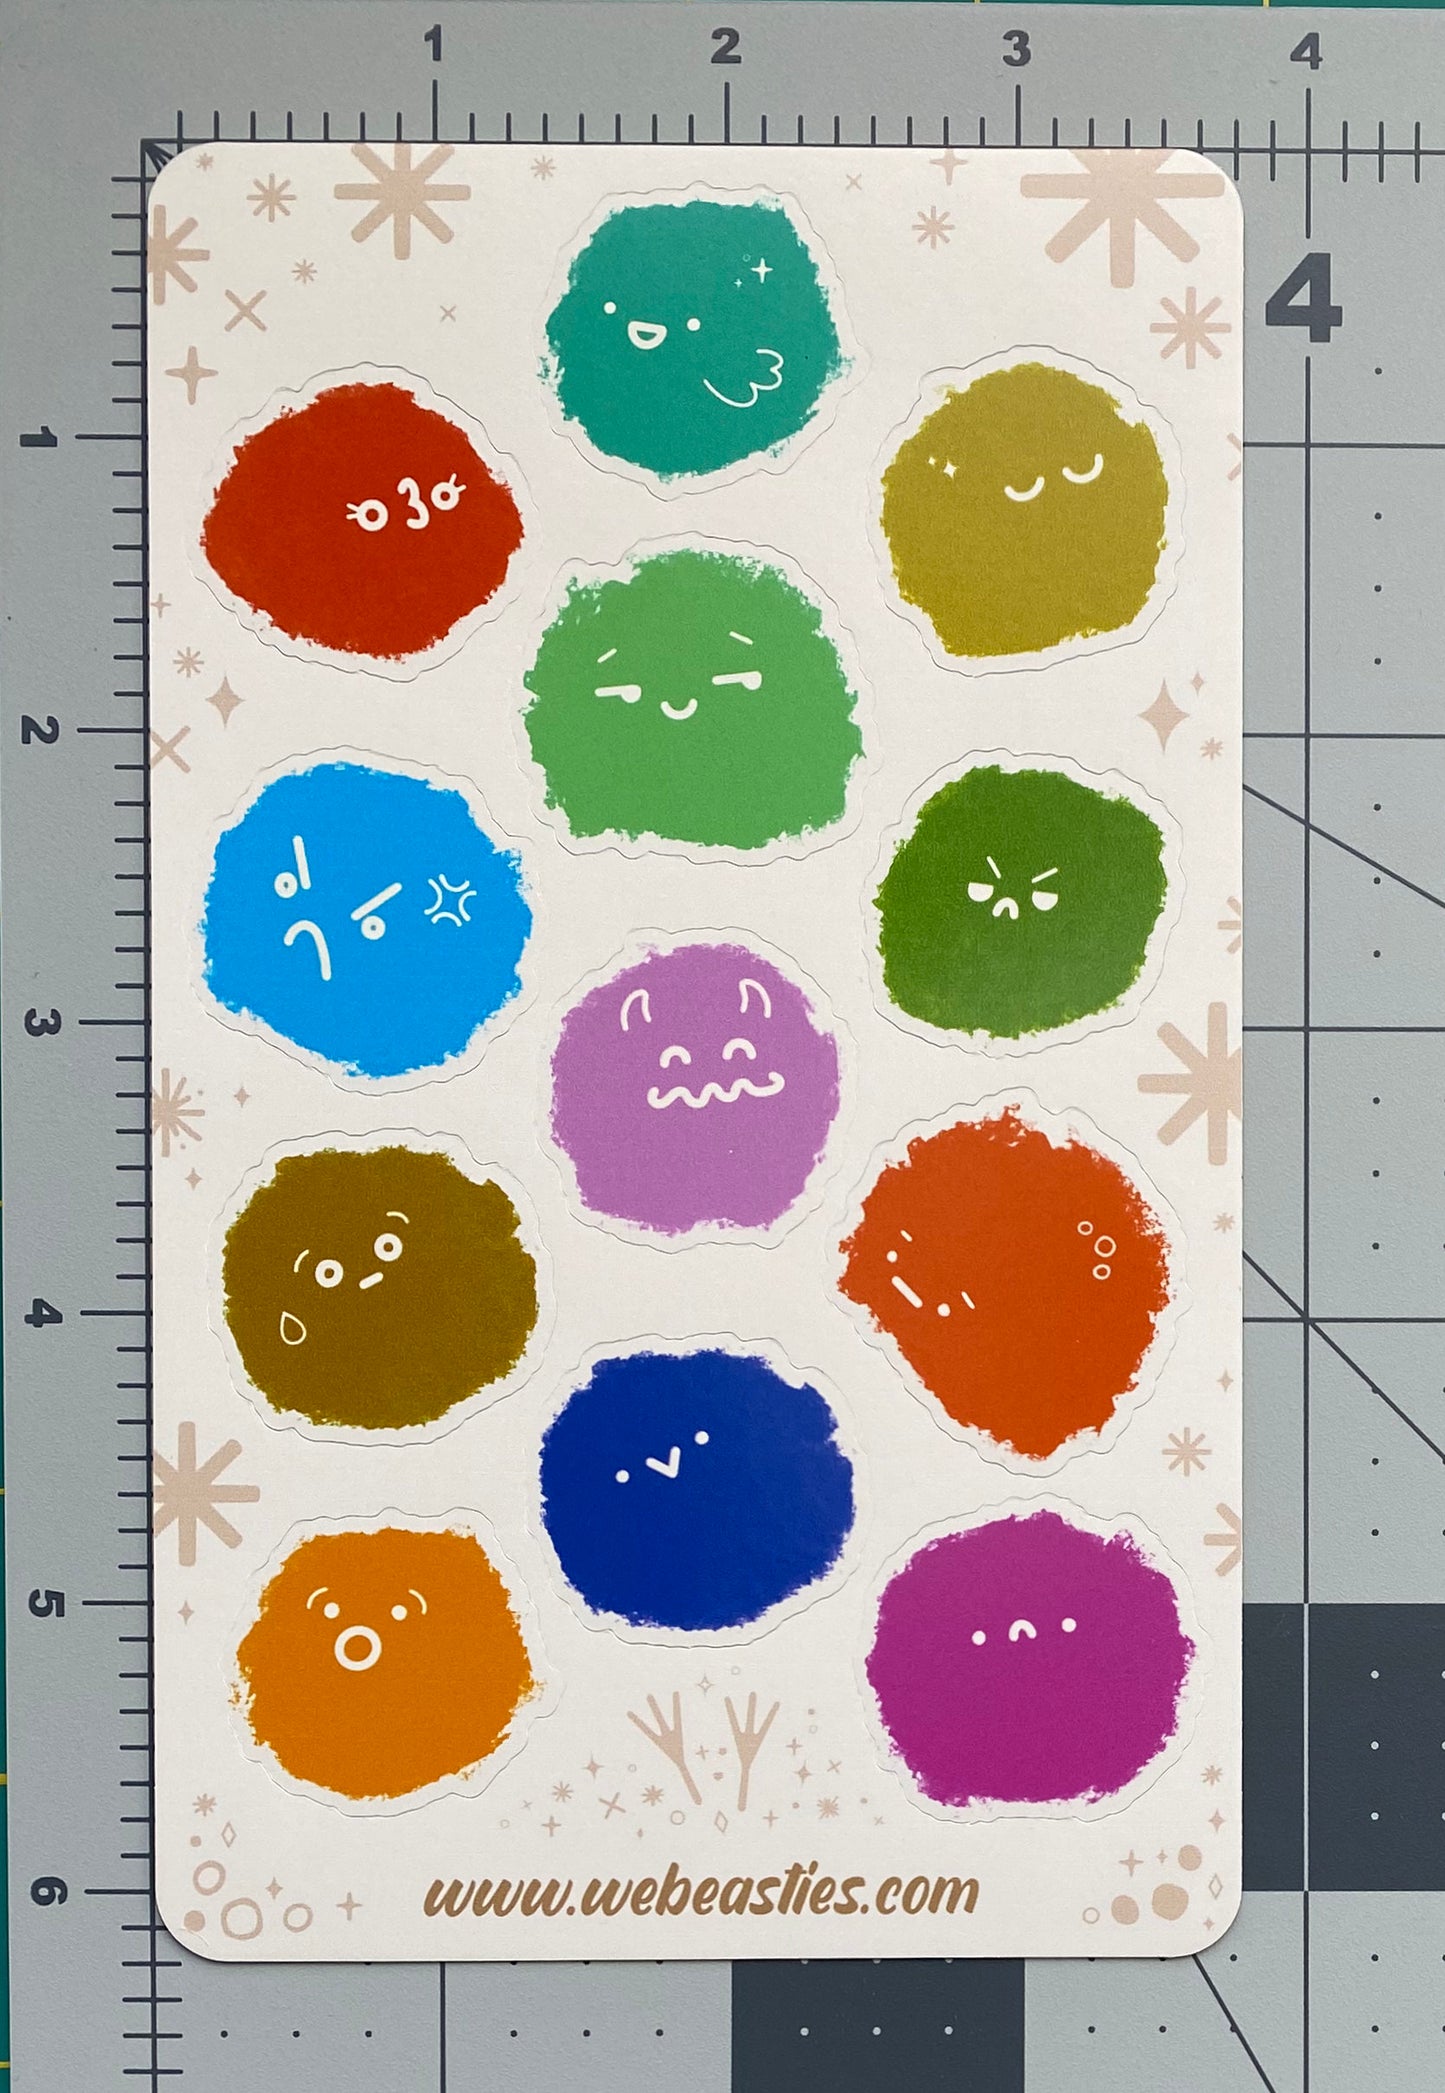 A photo the Fluffies sticker sheet against a ruled background to show its size.